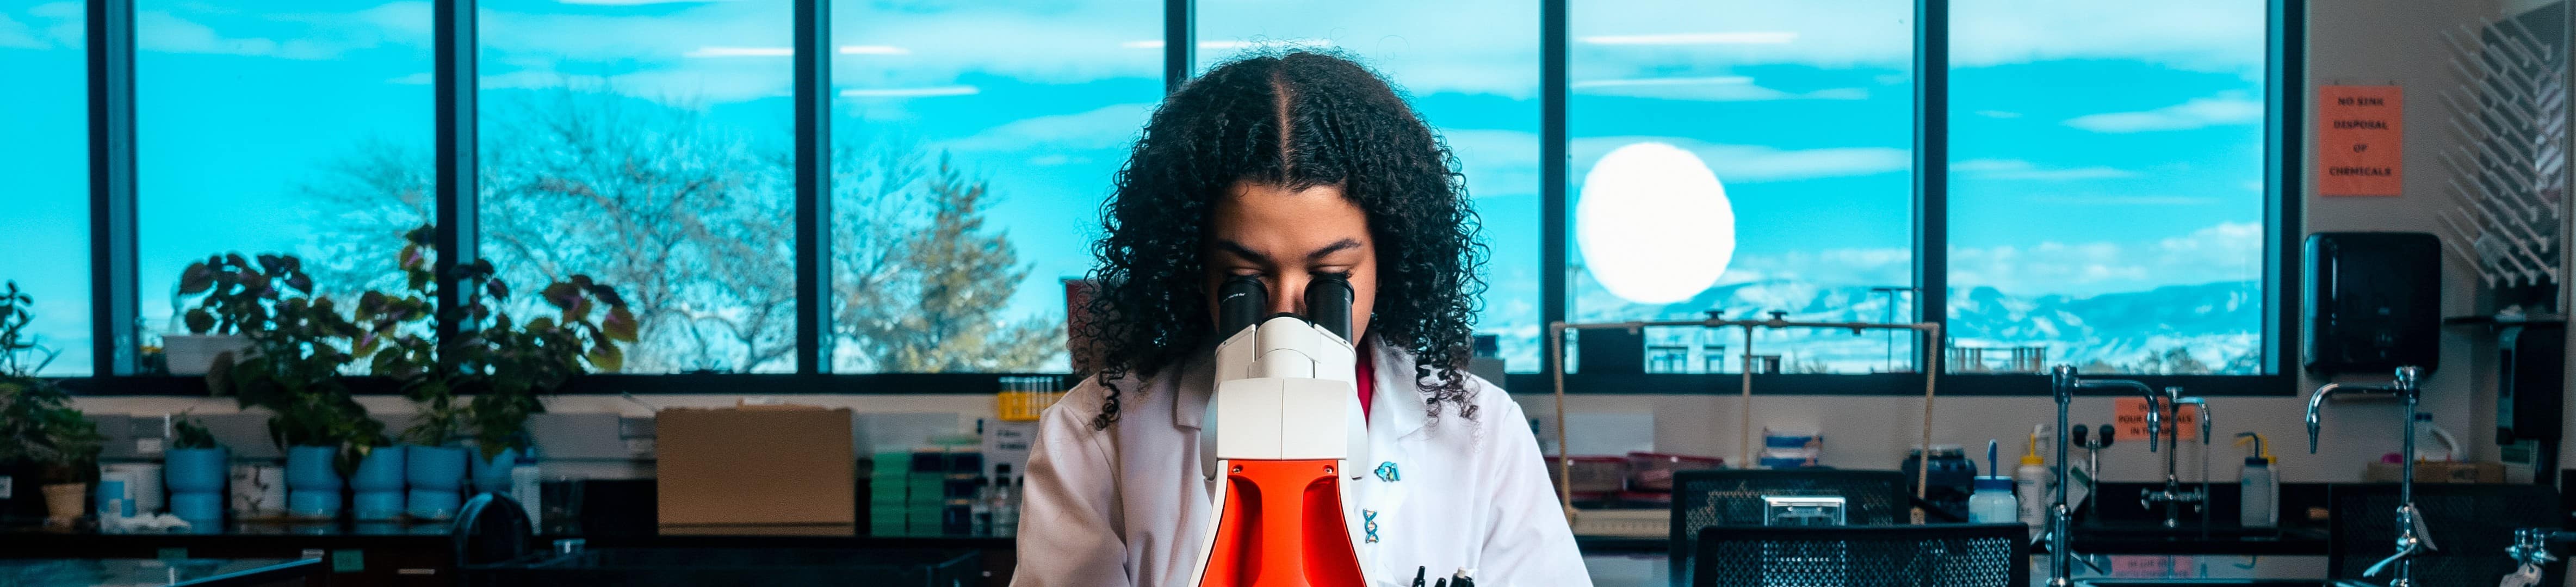 A student with dark skin tone wears a lab coat and looks into a microscope. Mountains can be seen through the wall of windows in the background.